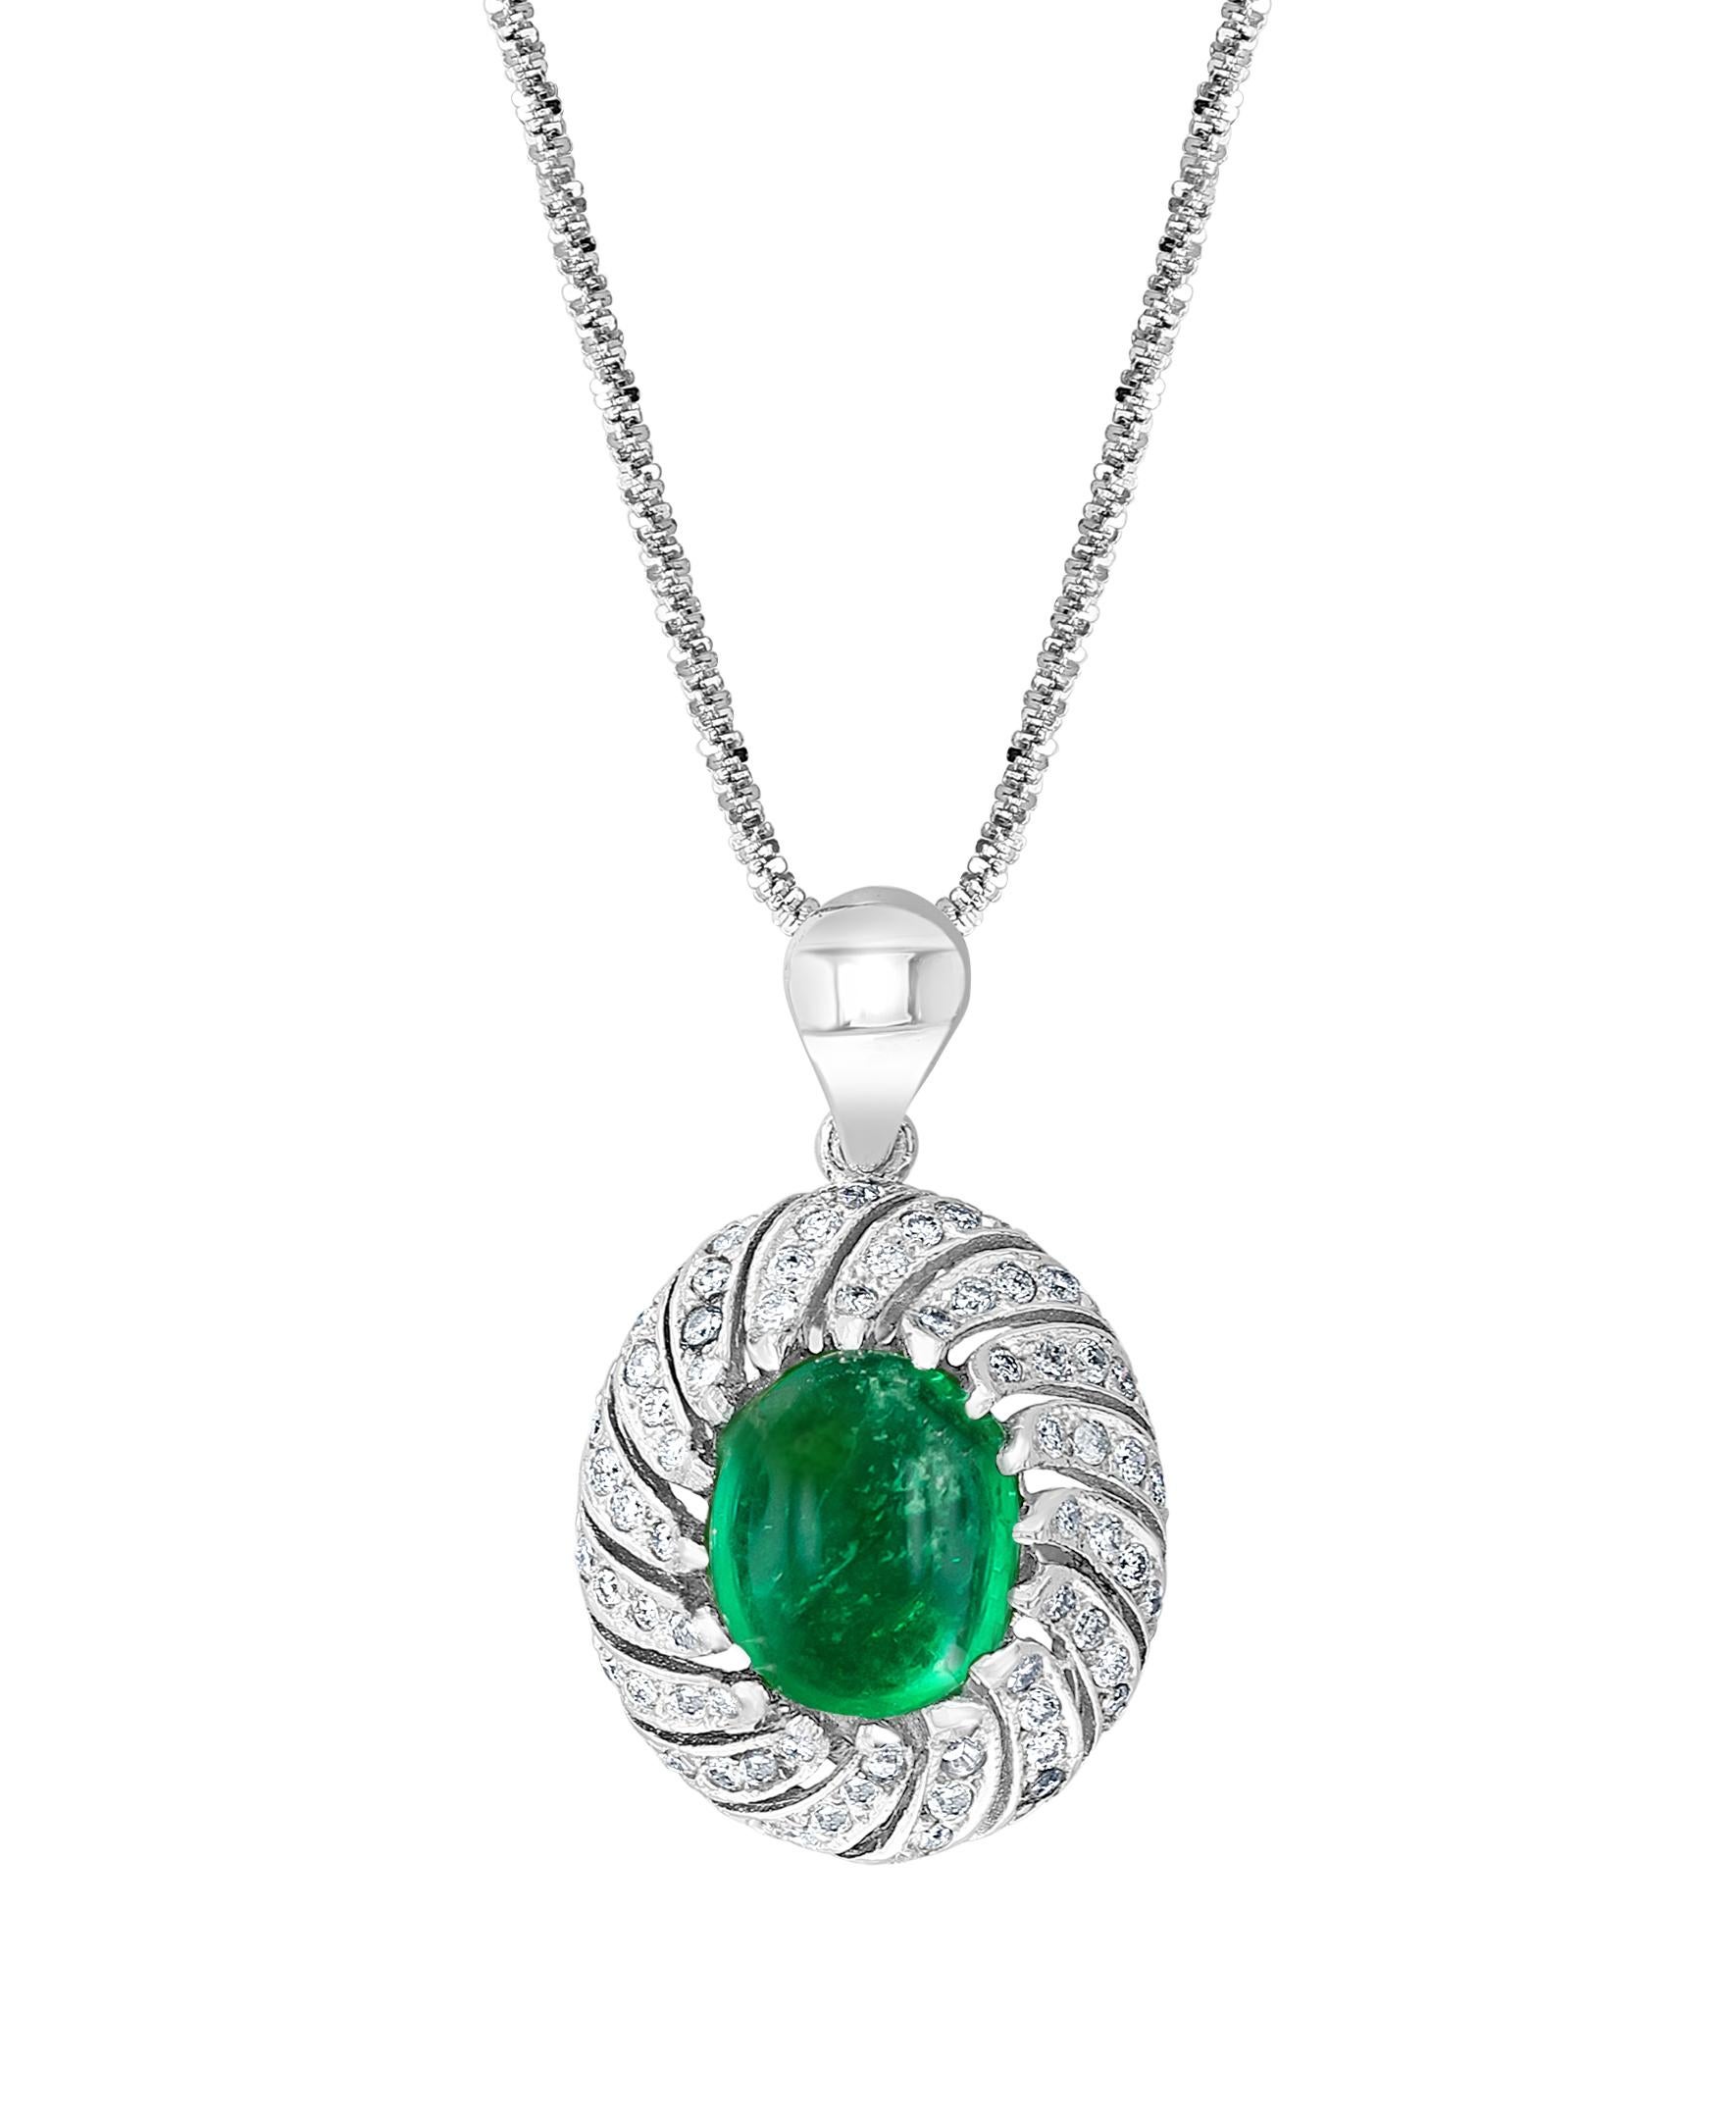 Approximately 6.5 Ct Natural Emerald Zambia Cabochon & Diamond Pendant in 14 K white gold

 Emerald is about 6.5 carat 
Very desirable color and quality. Extreme fine color and clarity.
No chain
Emerald origin is Zambia
Brilliant cut diamonds are